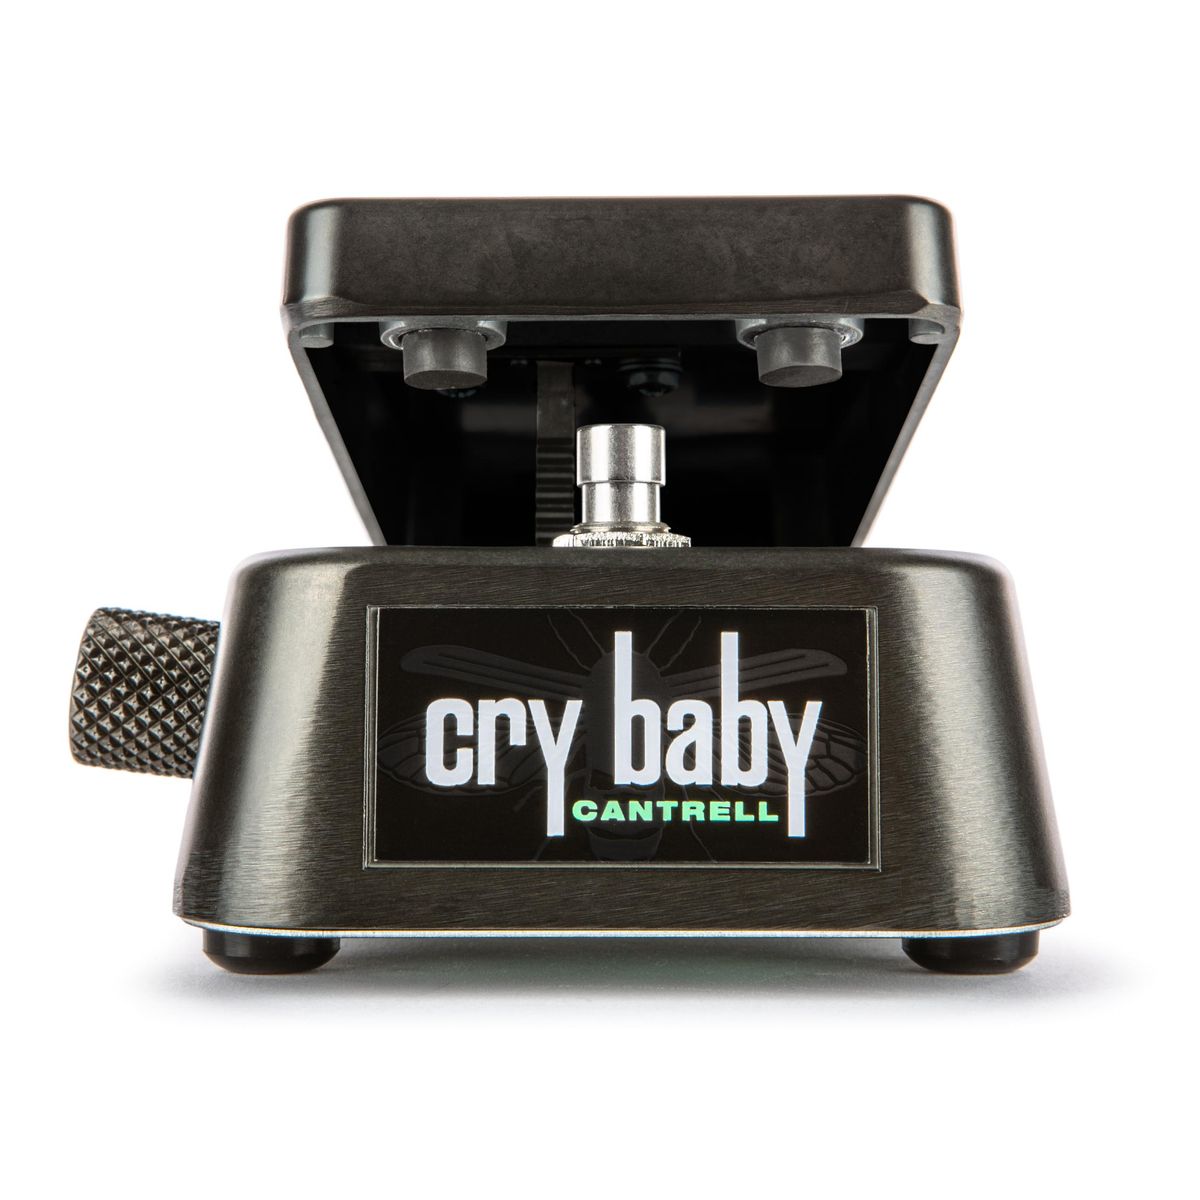 Jerry Cantrell & Dunlop Announce Revamped Signature Cry Baby Wah​